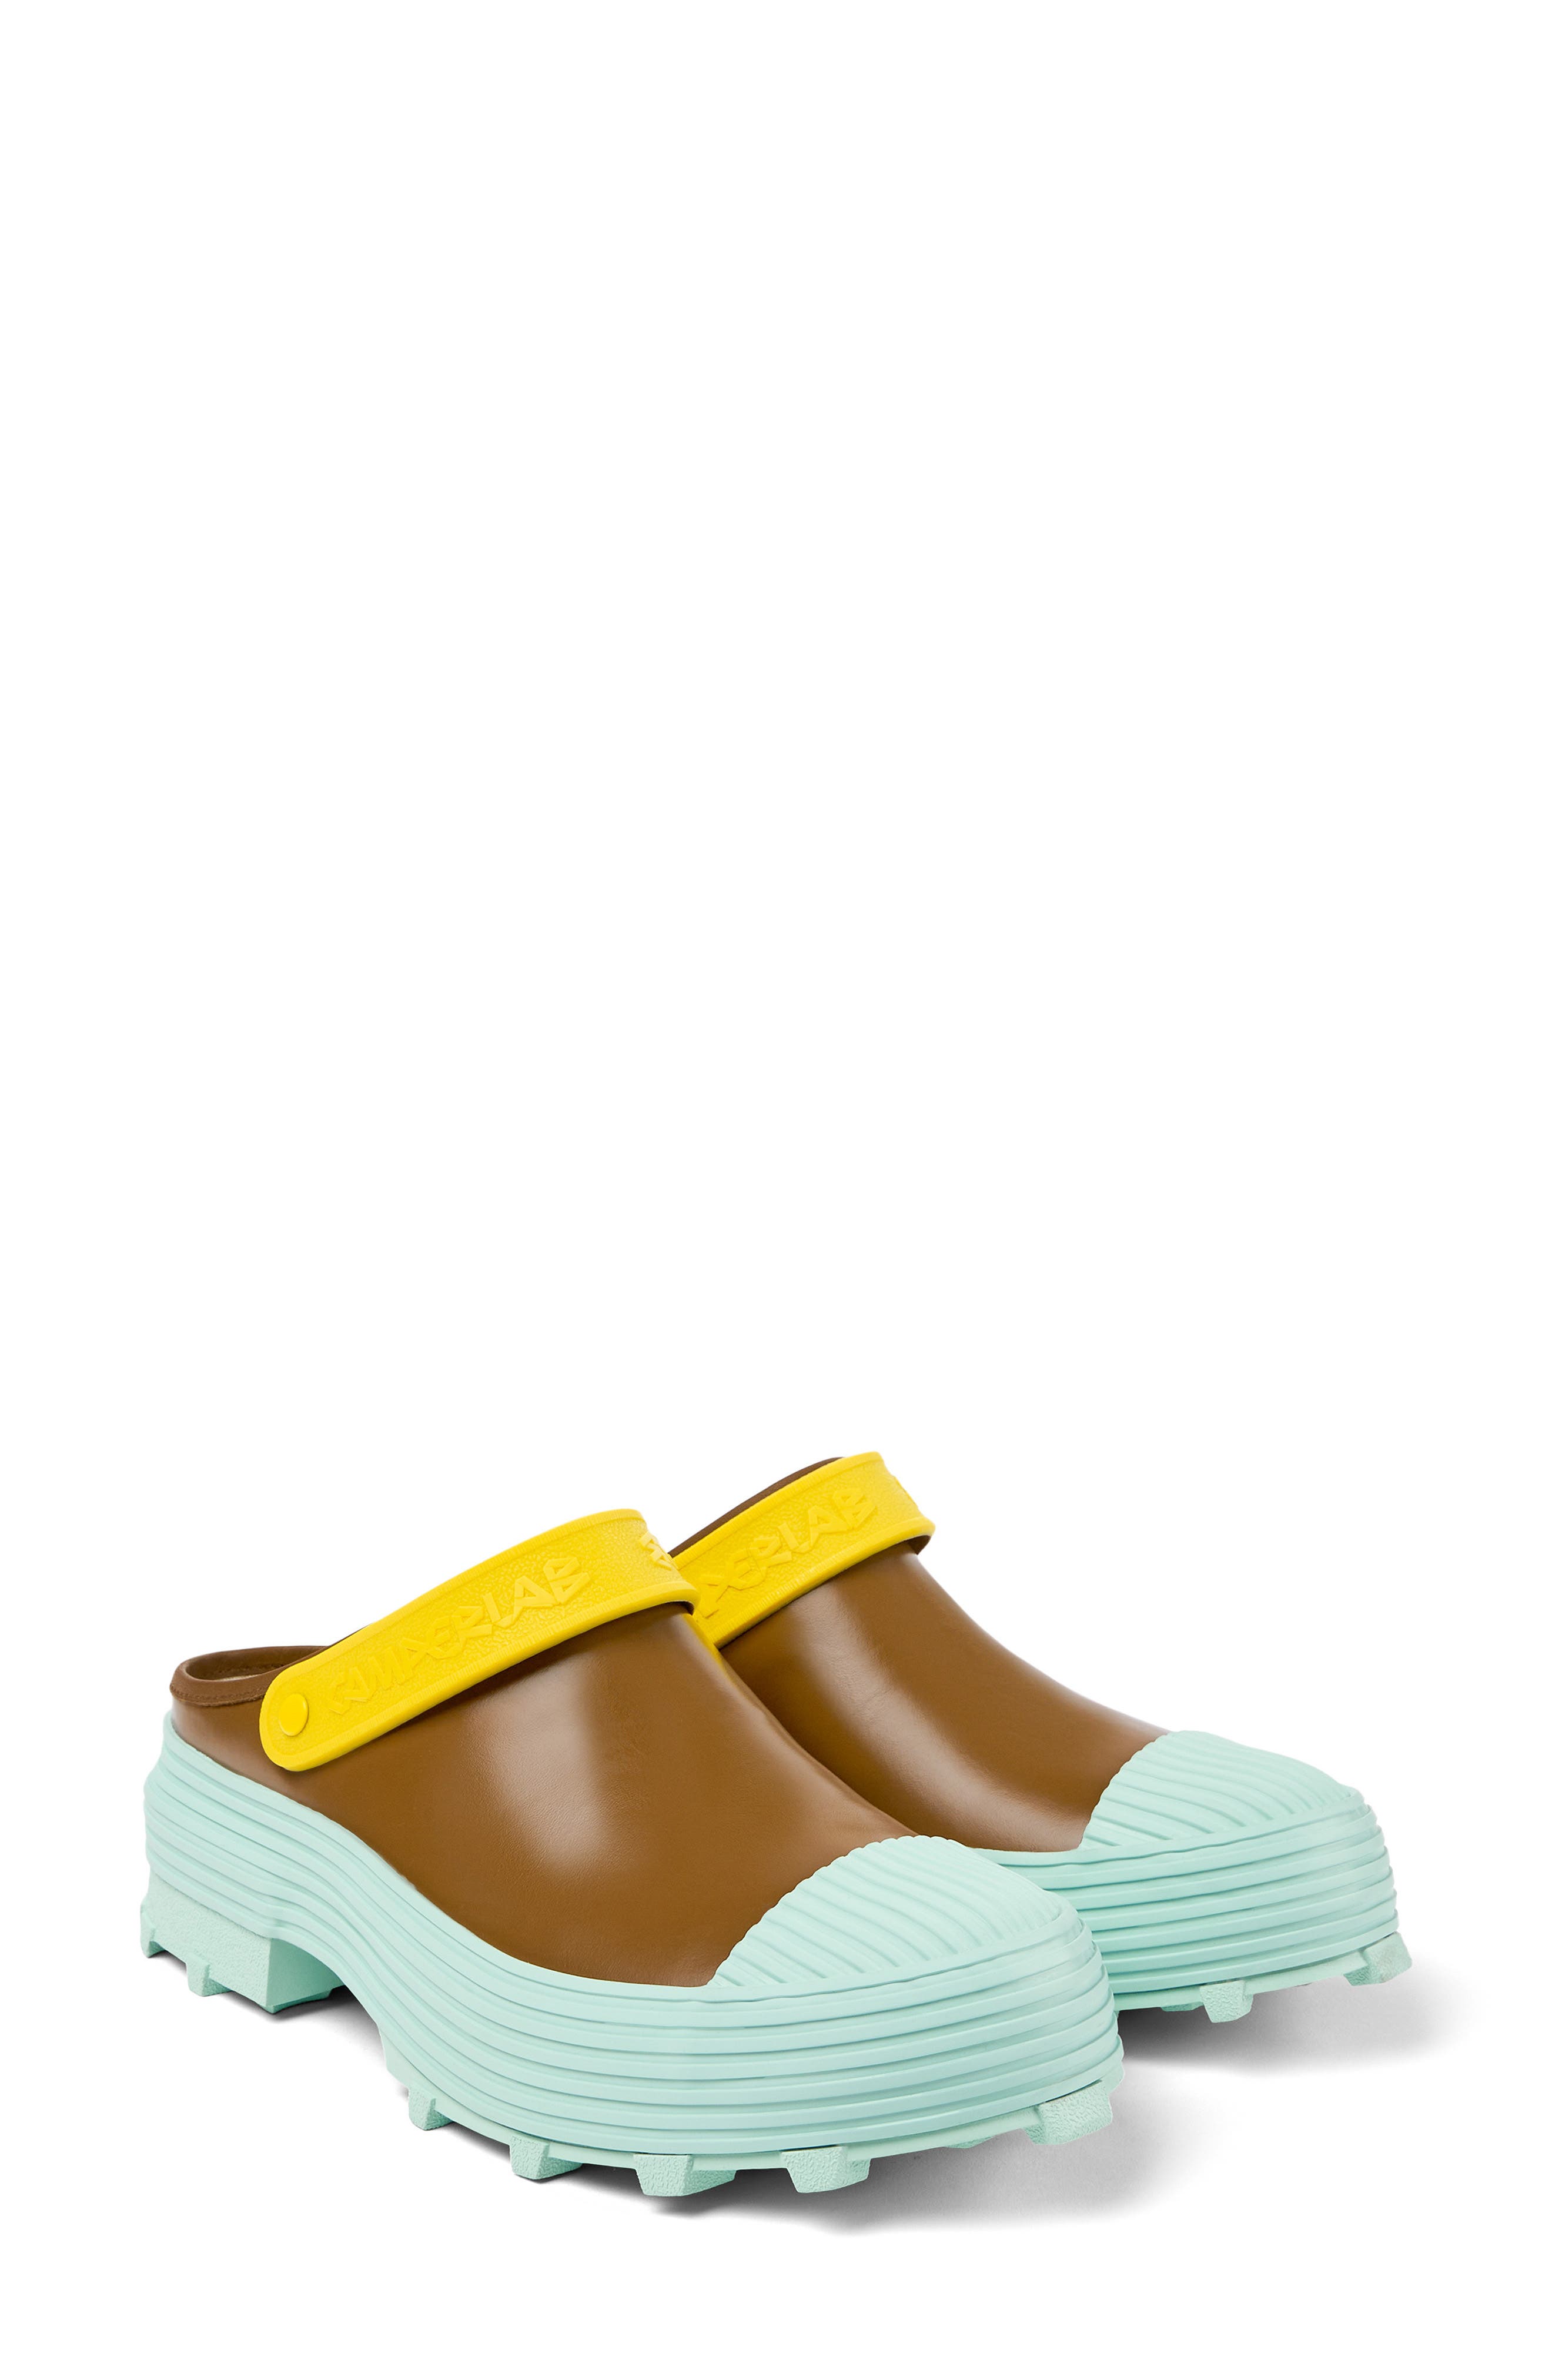 CamperLab square-toe slip-on shoes - Yellow